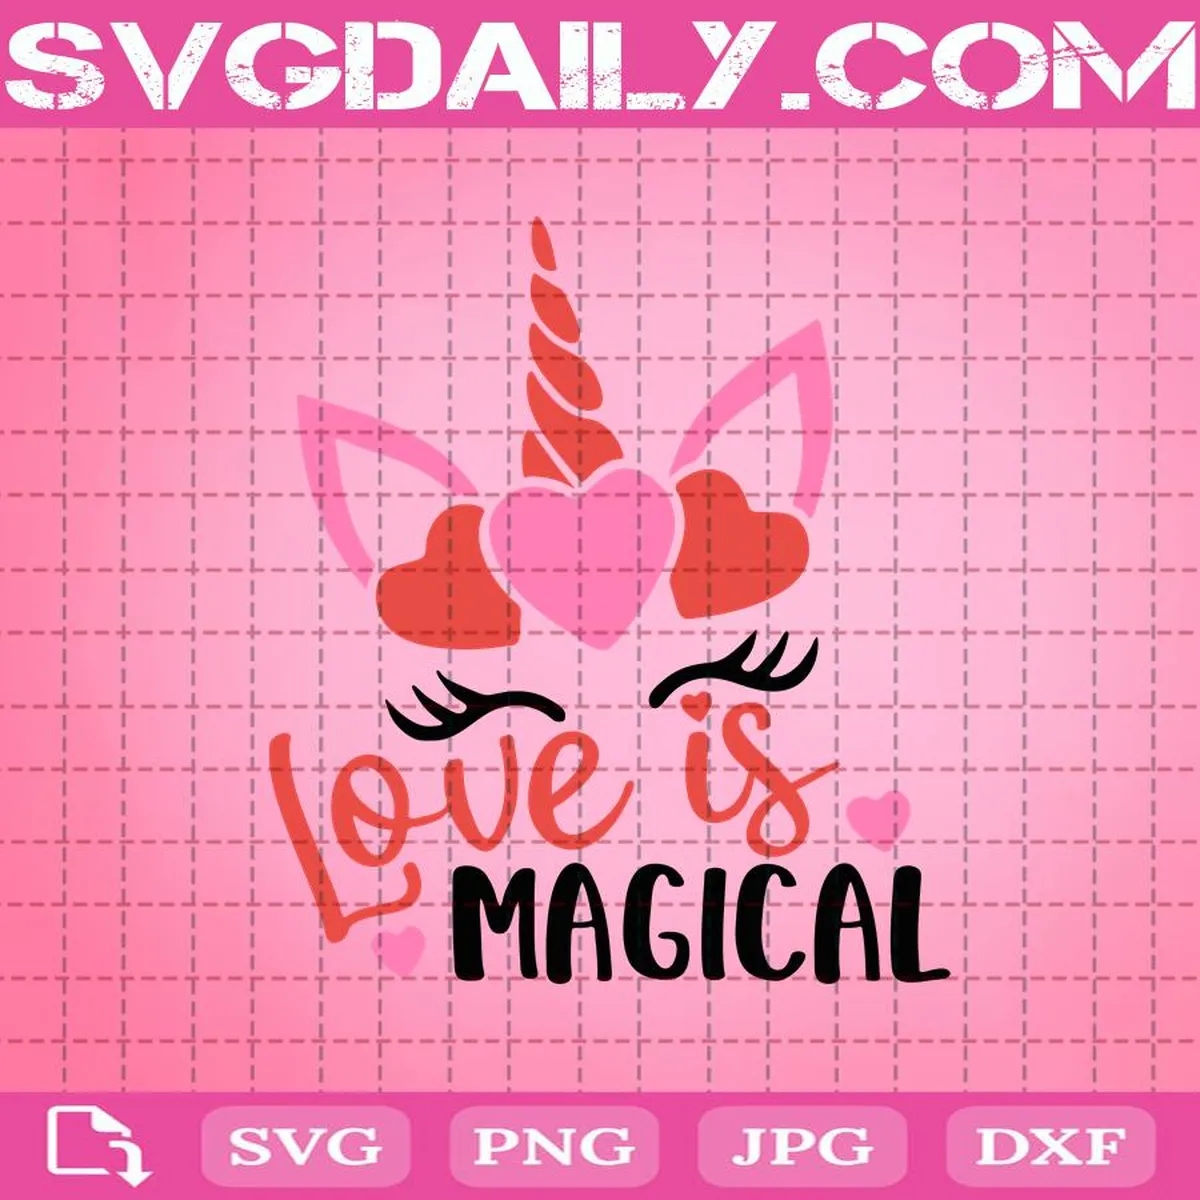 Love Is Magical Unicorn Valentine Svg, Love Is Magical Svg, Valentine Unicorn Svg, Unicorn Monogram Svg, Love Svg, Baby Girl Svg, Valentine Svg